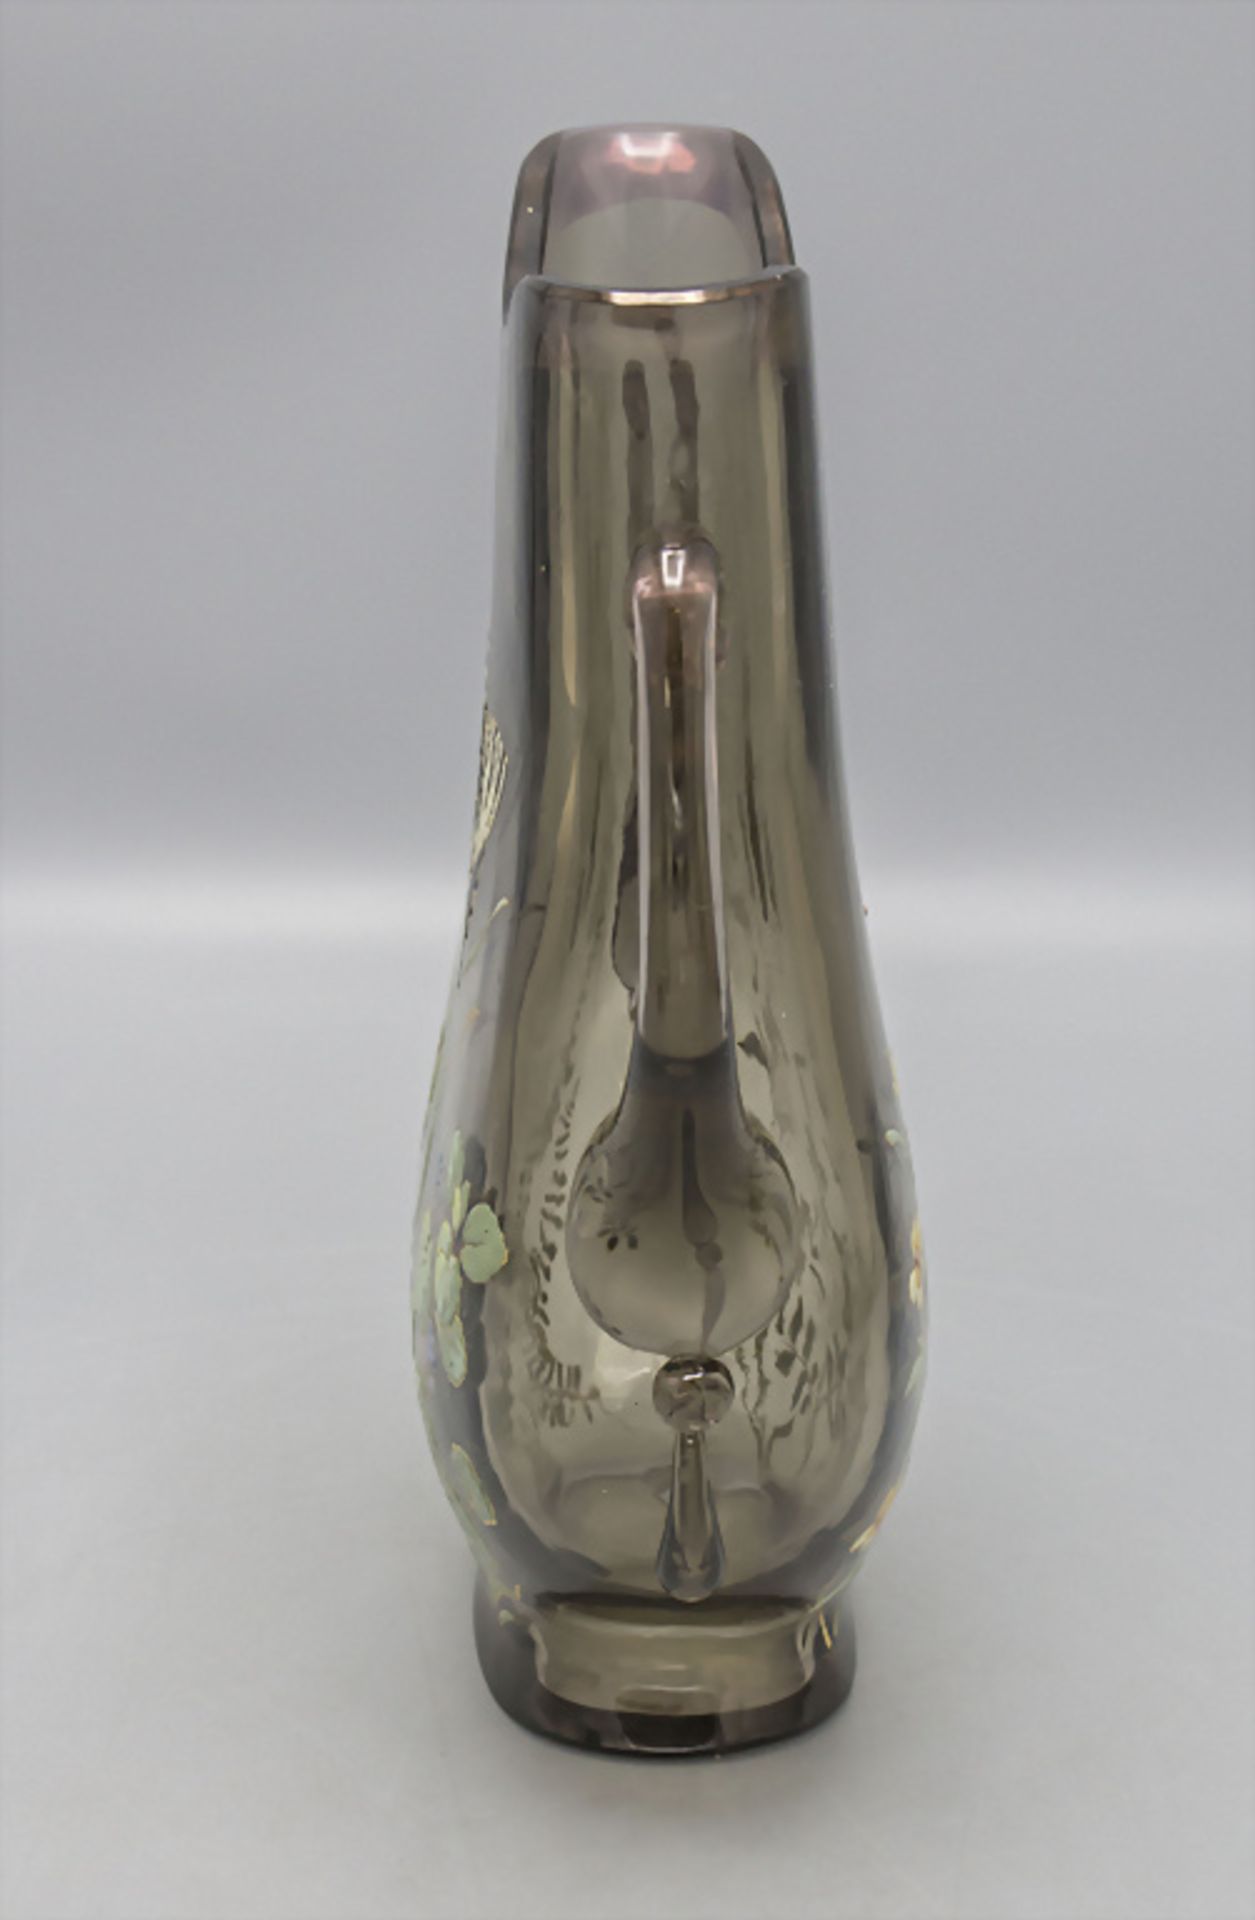 Jugendstil Vase mit Schmetterling / An Art Nouveau glass vase with handles and a swallowtail ... - Image 2 of 4